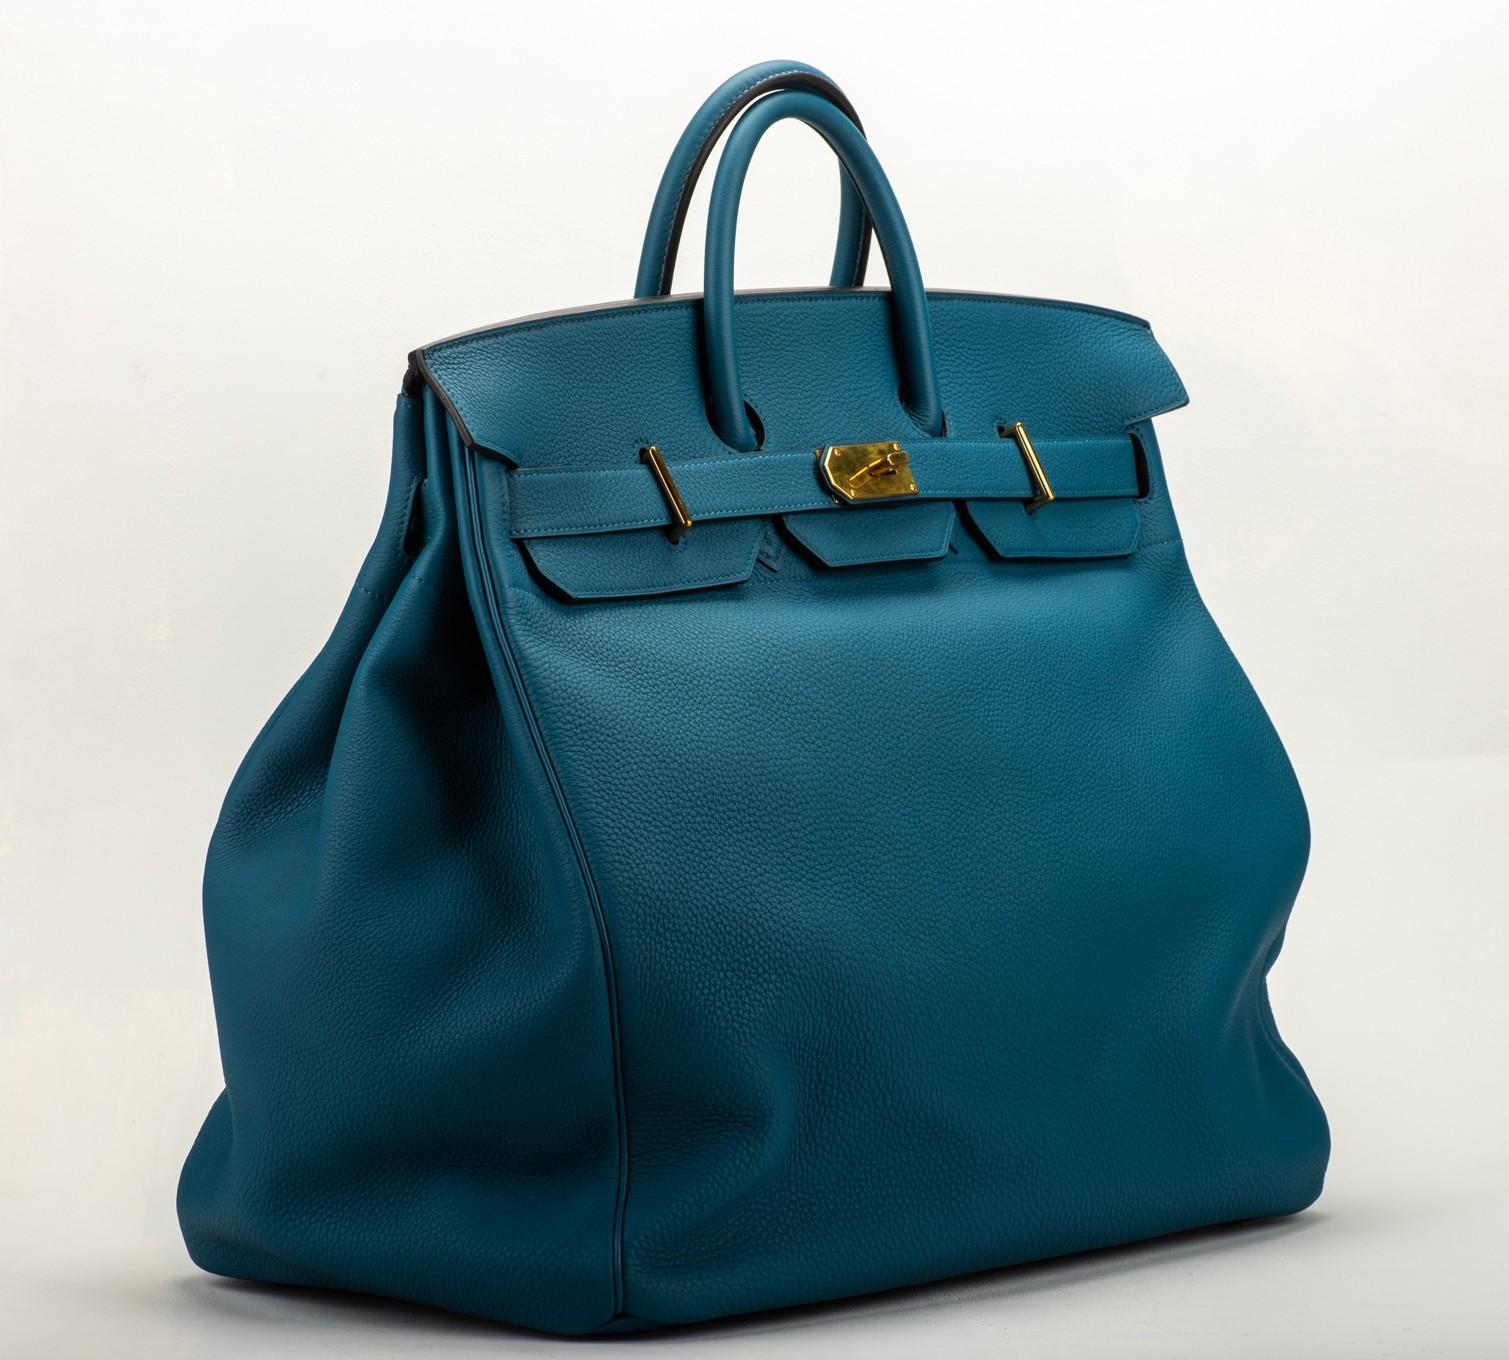 Hermes icon 1892 creation. Original bag to carry the horse saddle. Blue cobalt clemence leather with gold hardware. Date stamp R for 2014. Handle drop 4